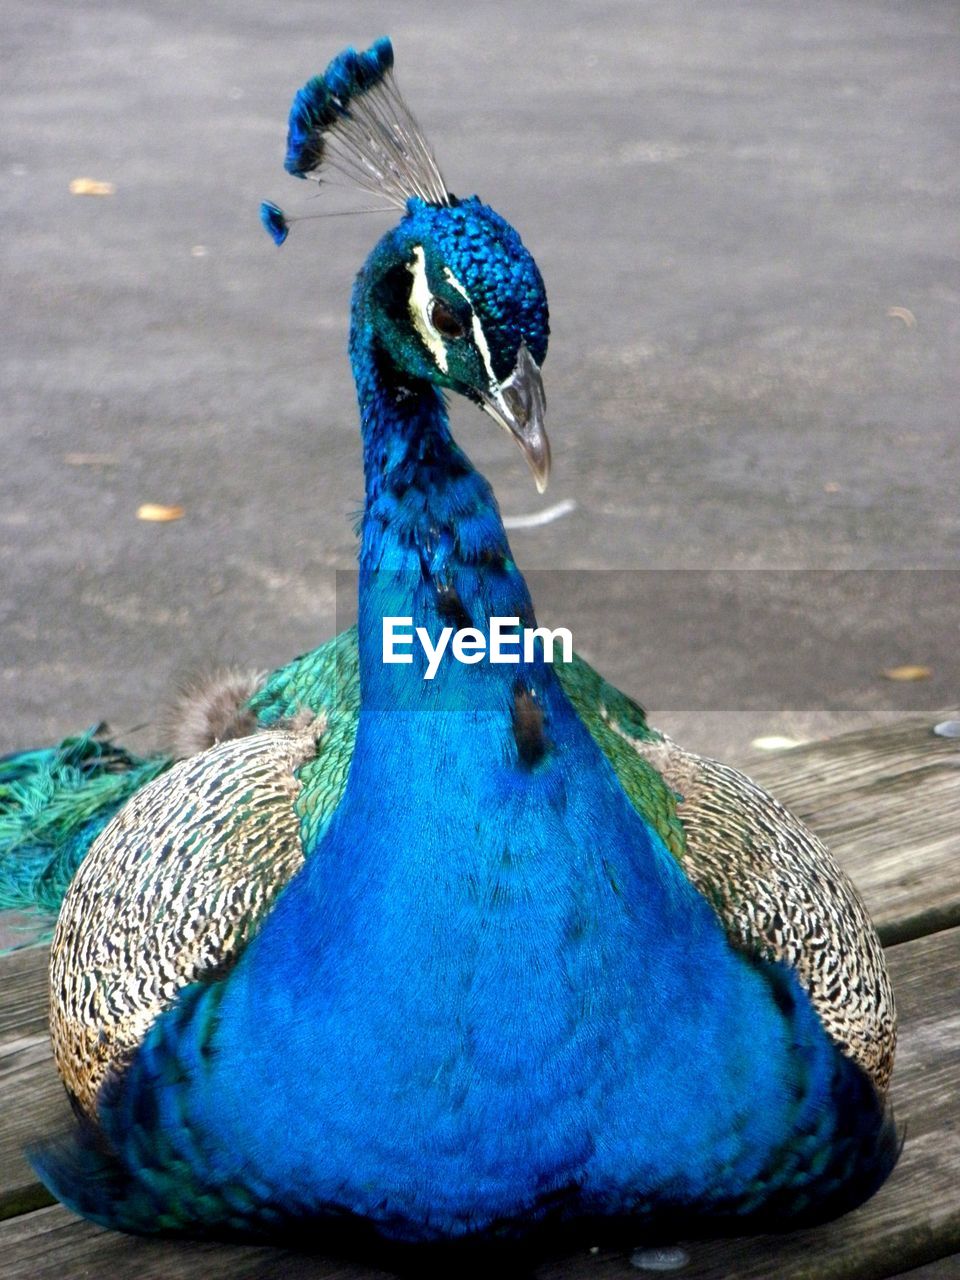 CLOSE-UP OF PEACOCK WITH BLUE FEATHER